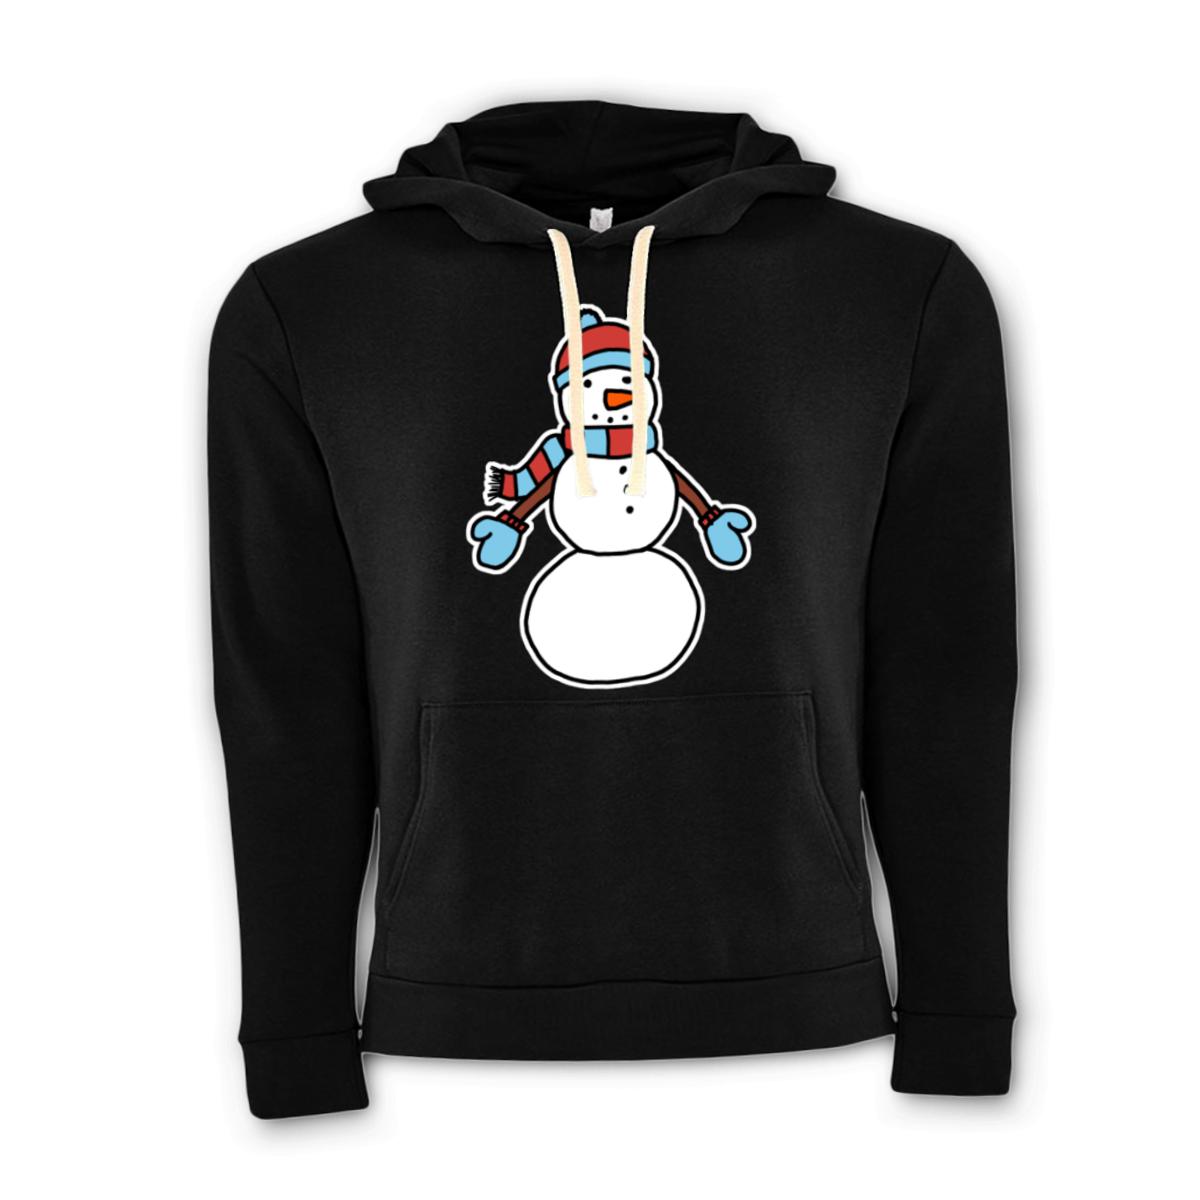 Snowman Bundled Up Unisex Pullover Hoodie Small black